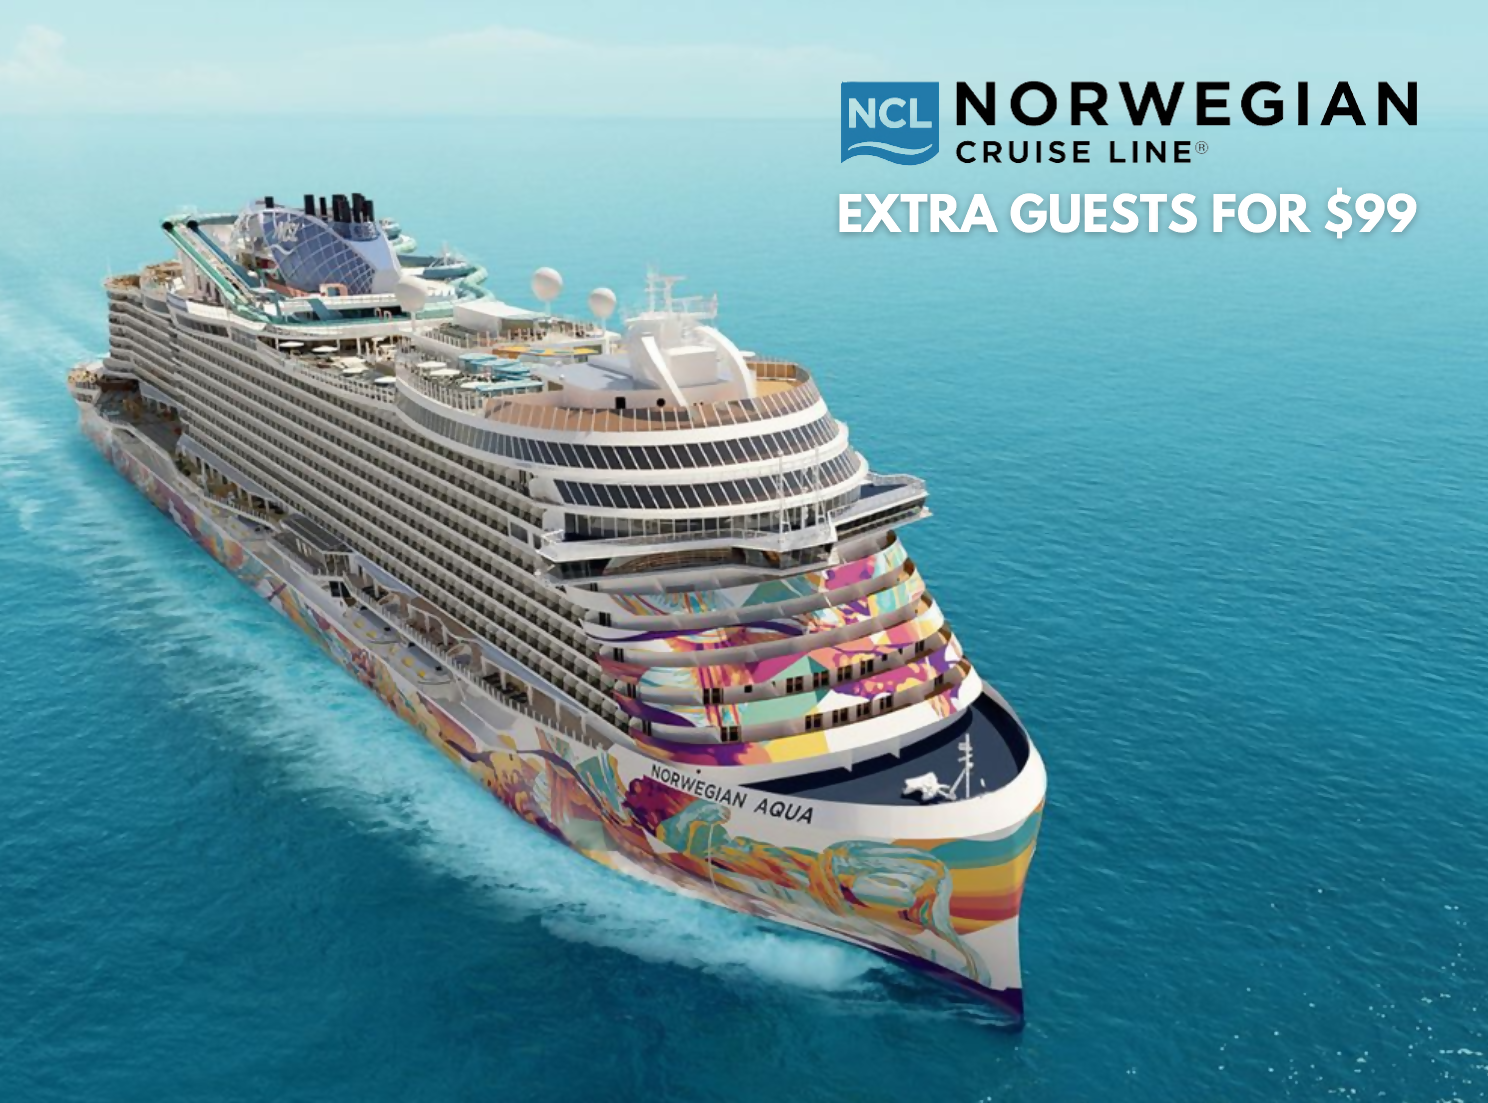 Bring Extra Friends or Family for Just $99 with Norwegian Cruise Line!